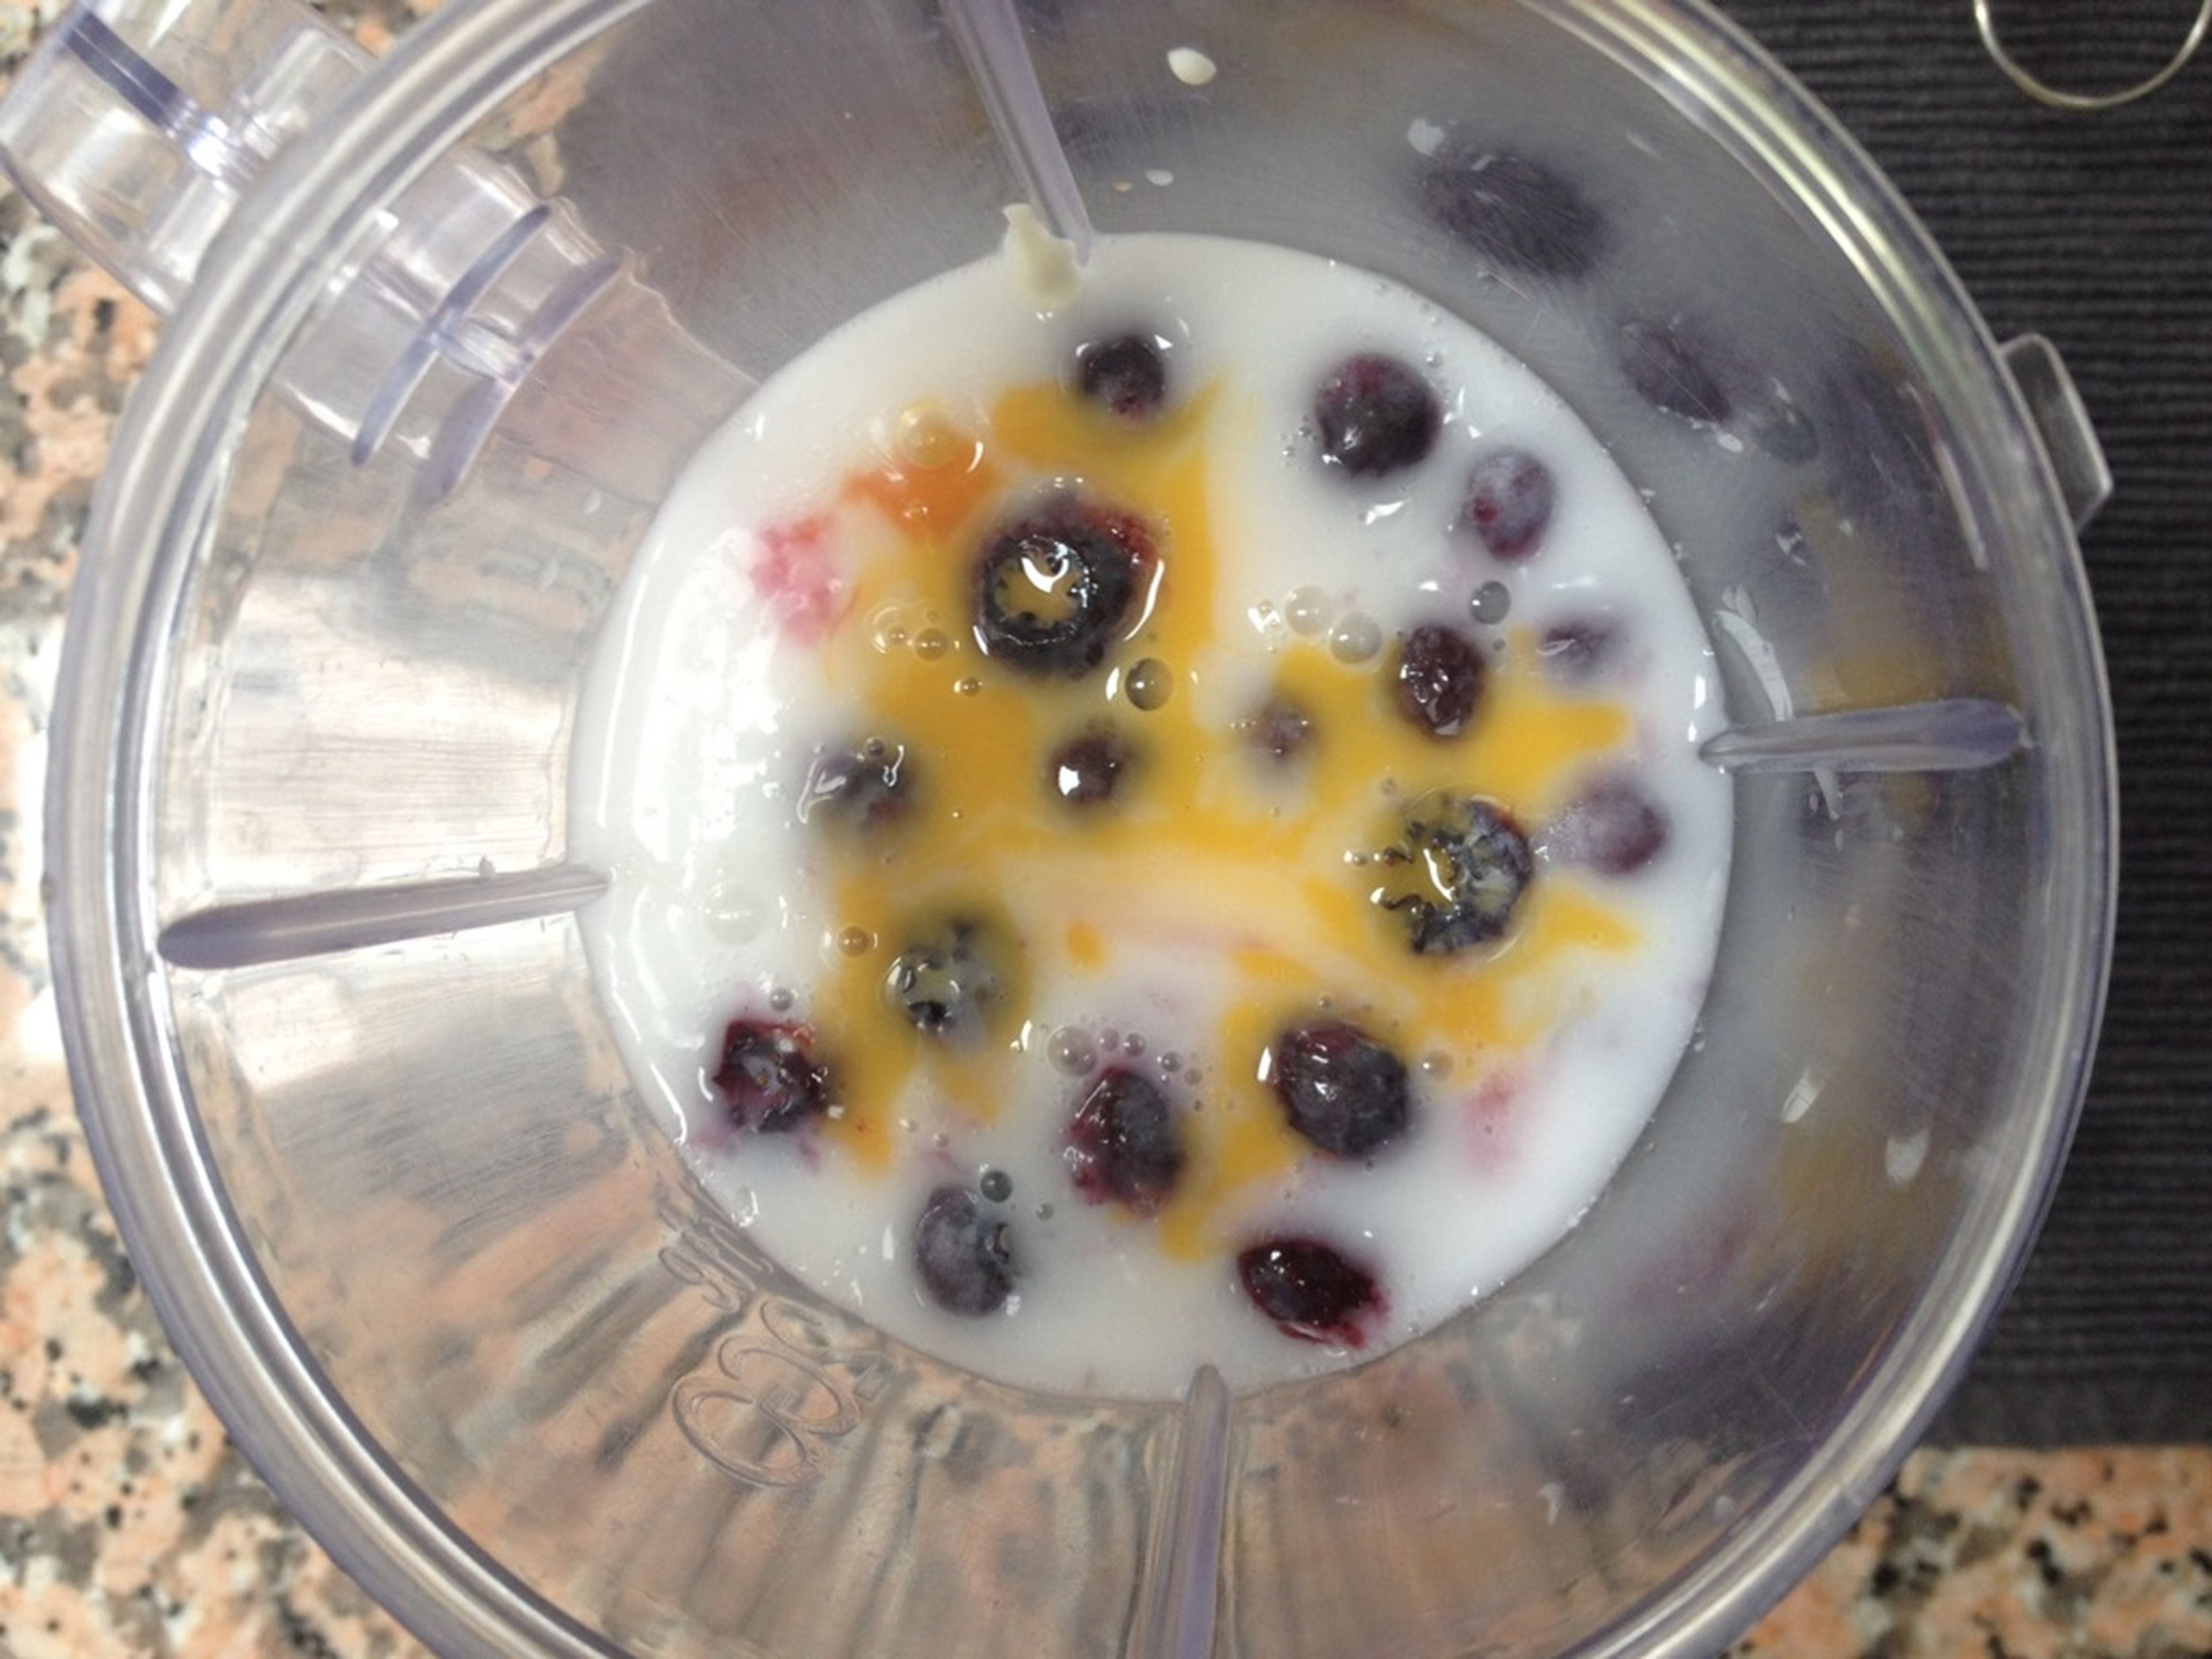 Add the passion fruit juice and all the other ingredients to a blender and mix for approx. 2 min. or until smooth.